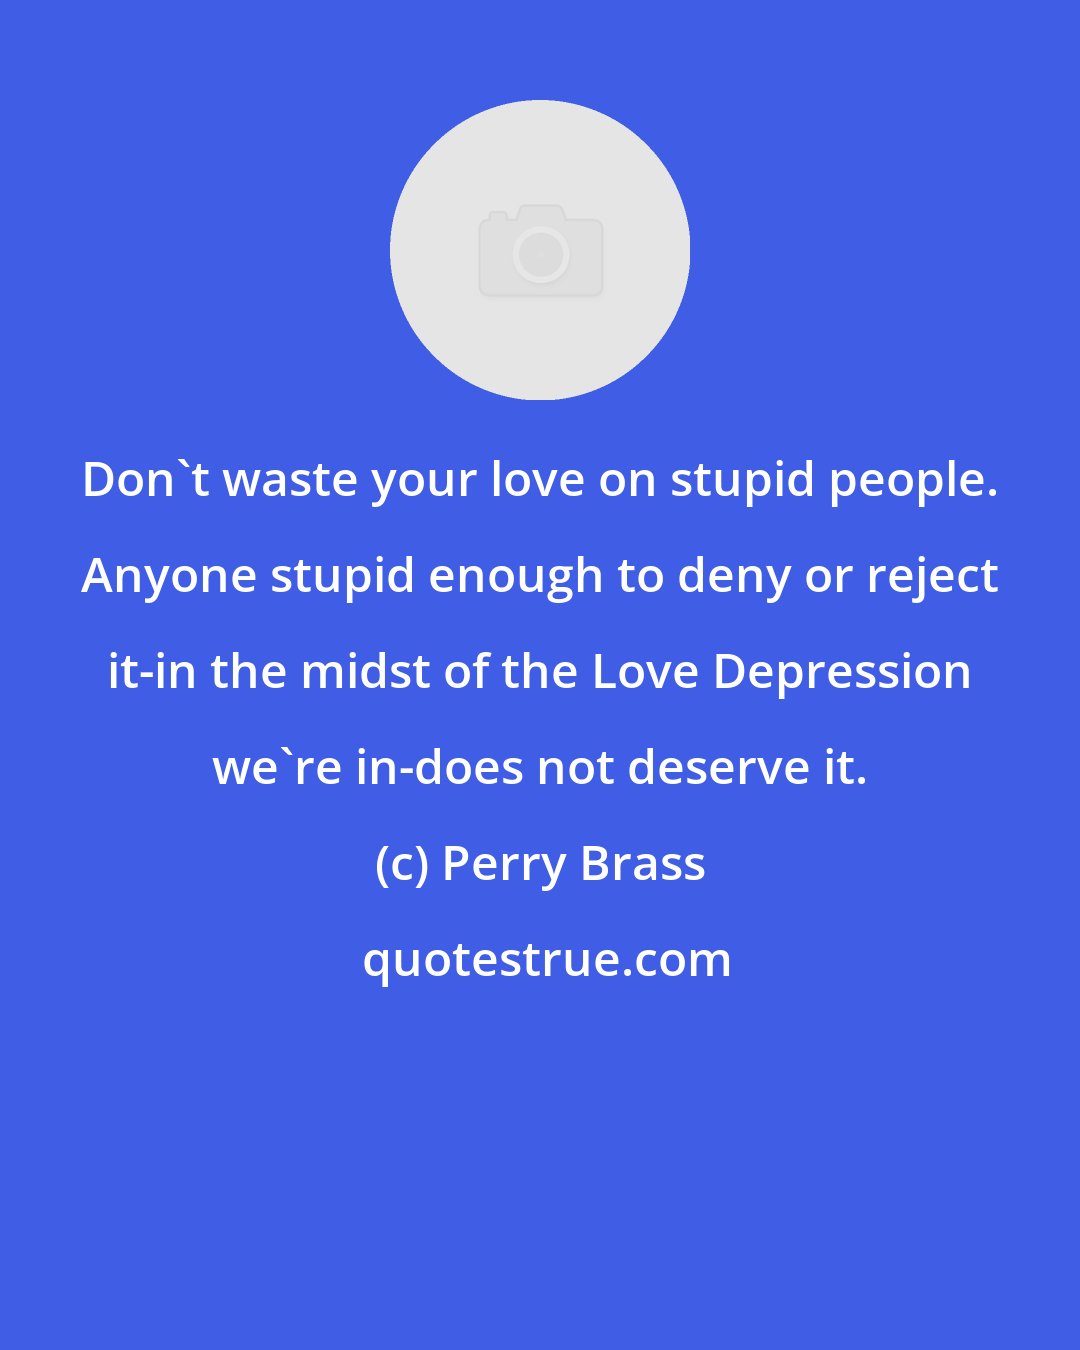 Perry Brass: Don't waste your love on stupid people. Anyone stupid enough to deny or reject it-in the midst of the Love Depression we're in-does not deserve it.